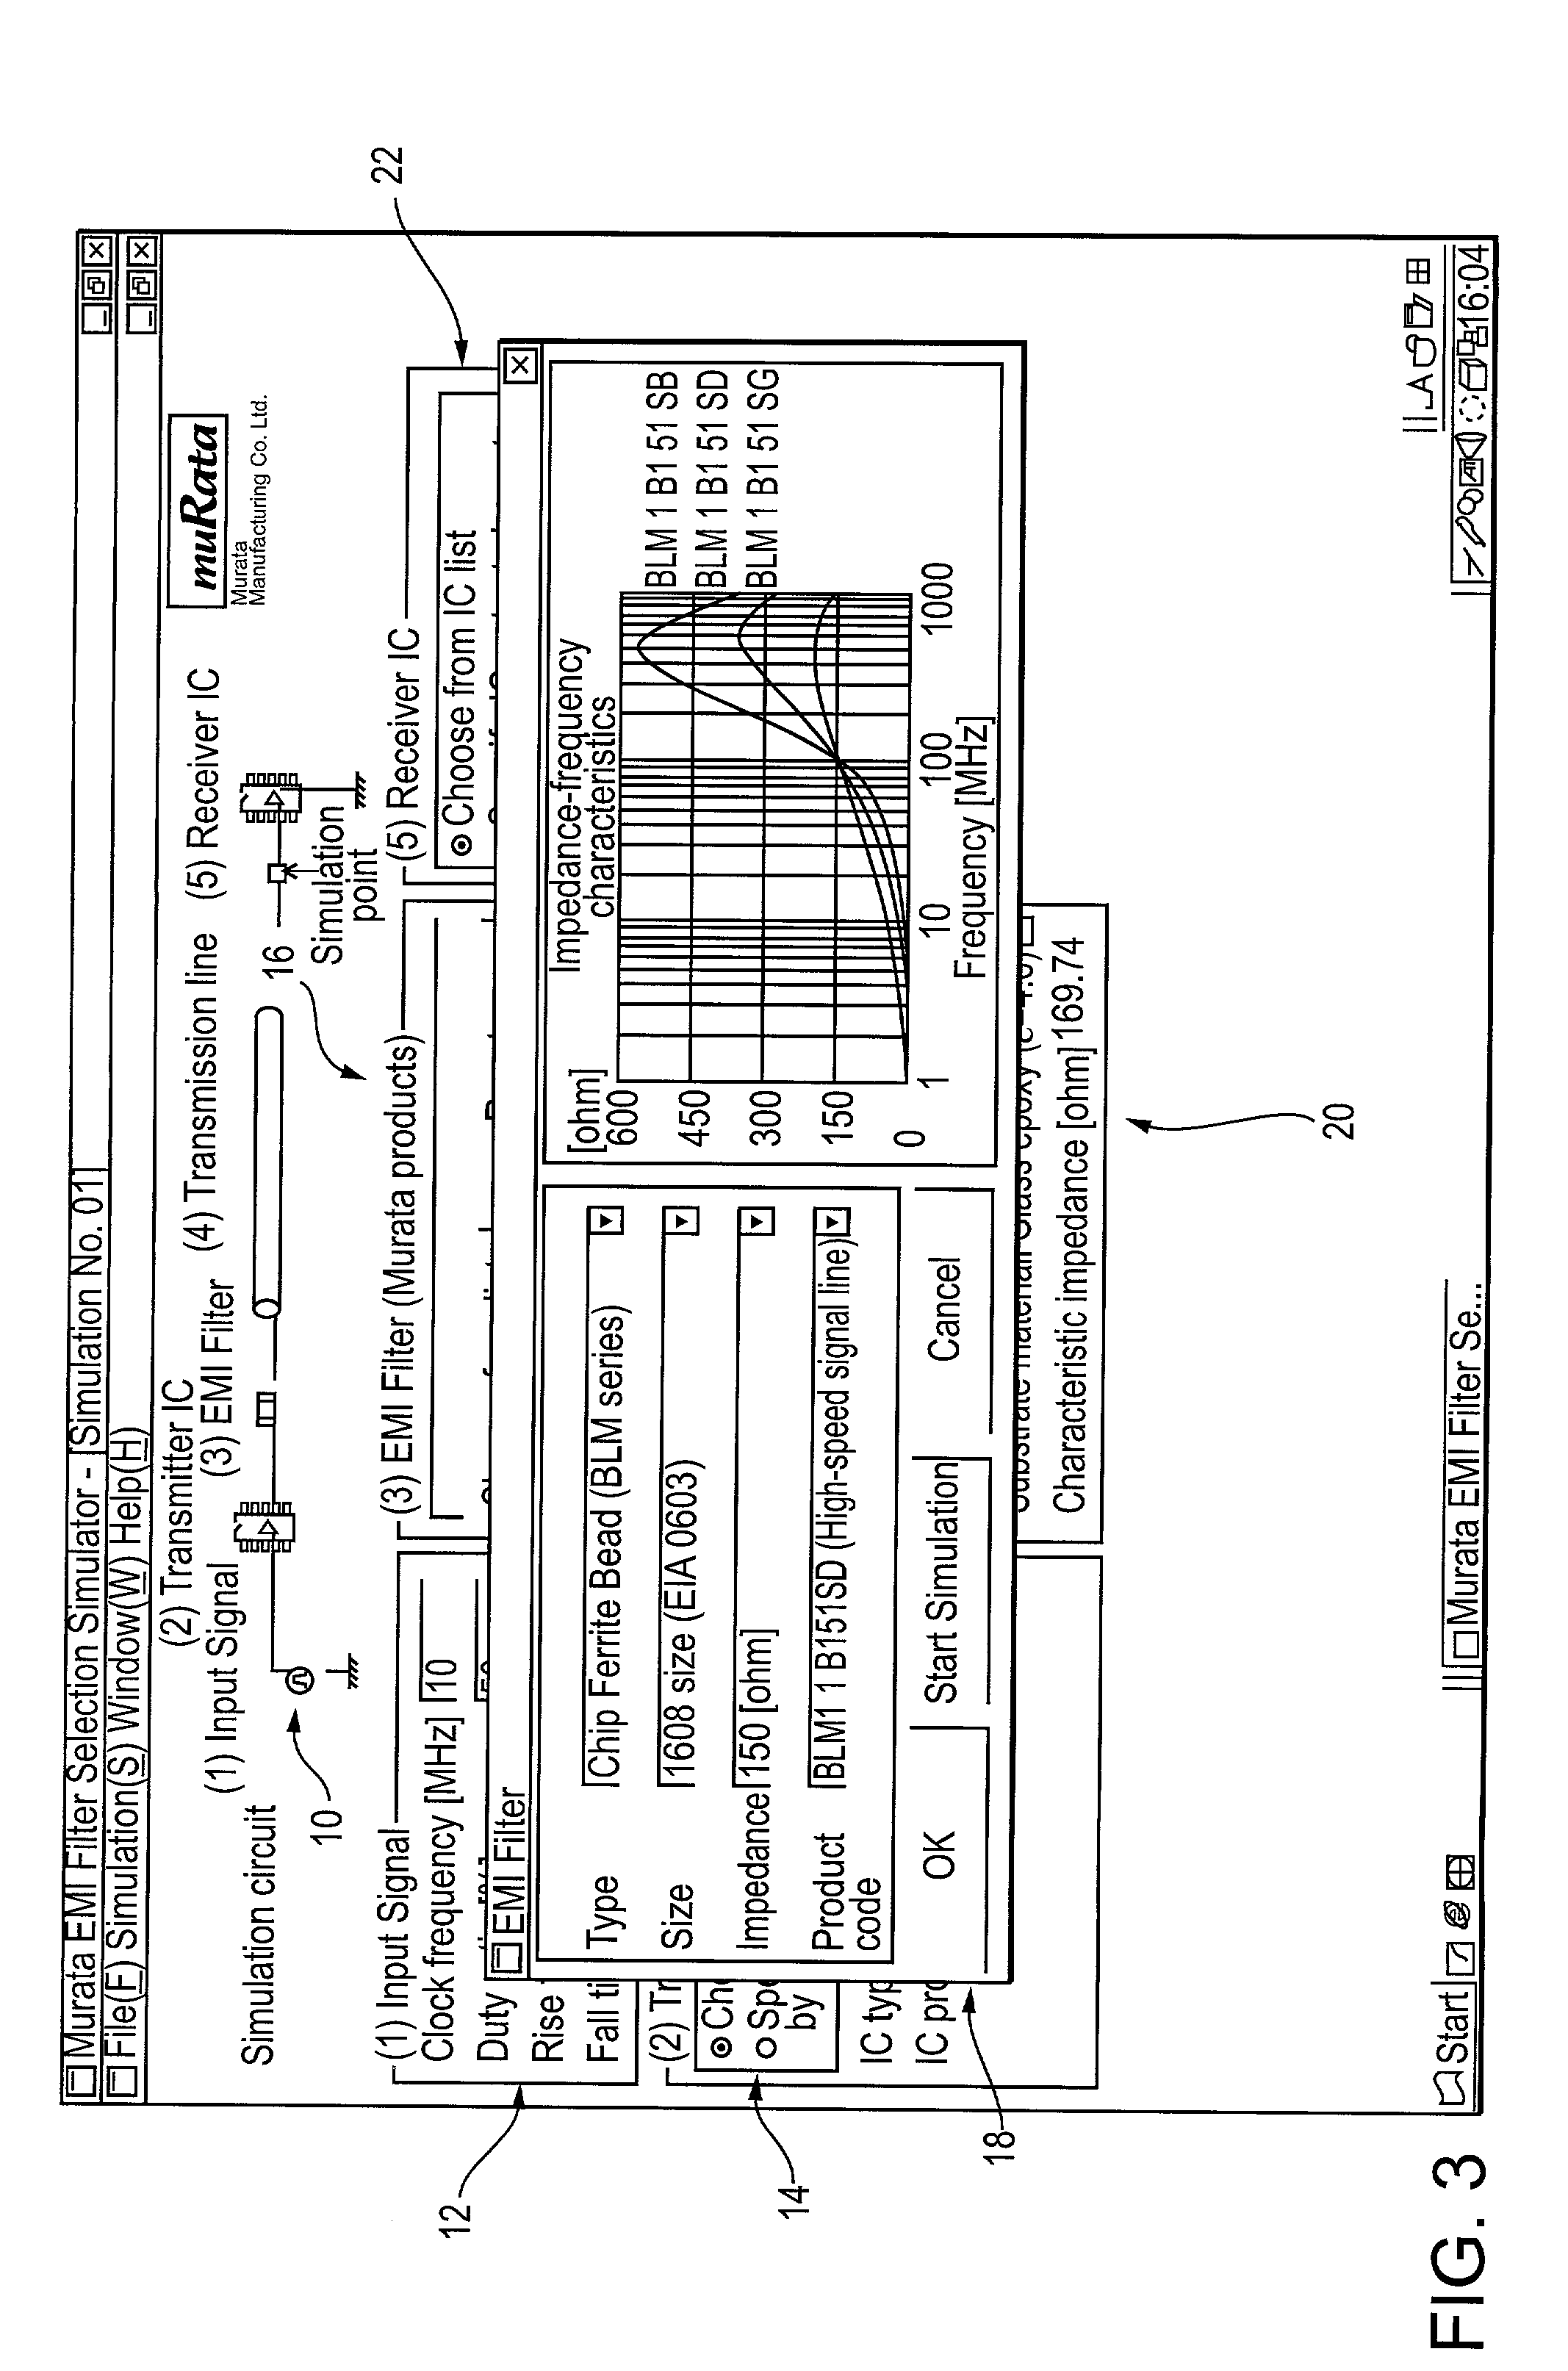 Method and apparatus for analyzing noise in a digital circuit, and storage medium storing an analysis program